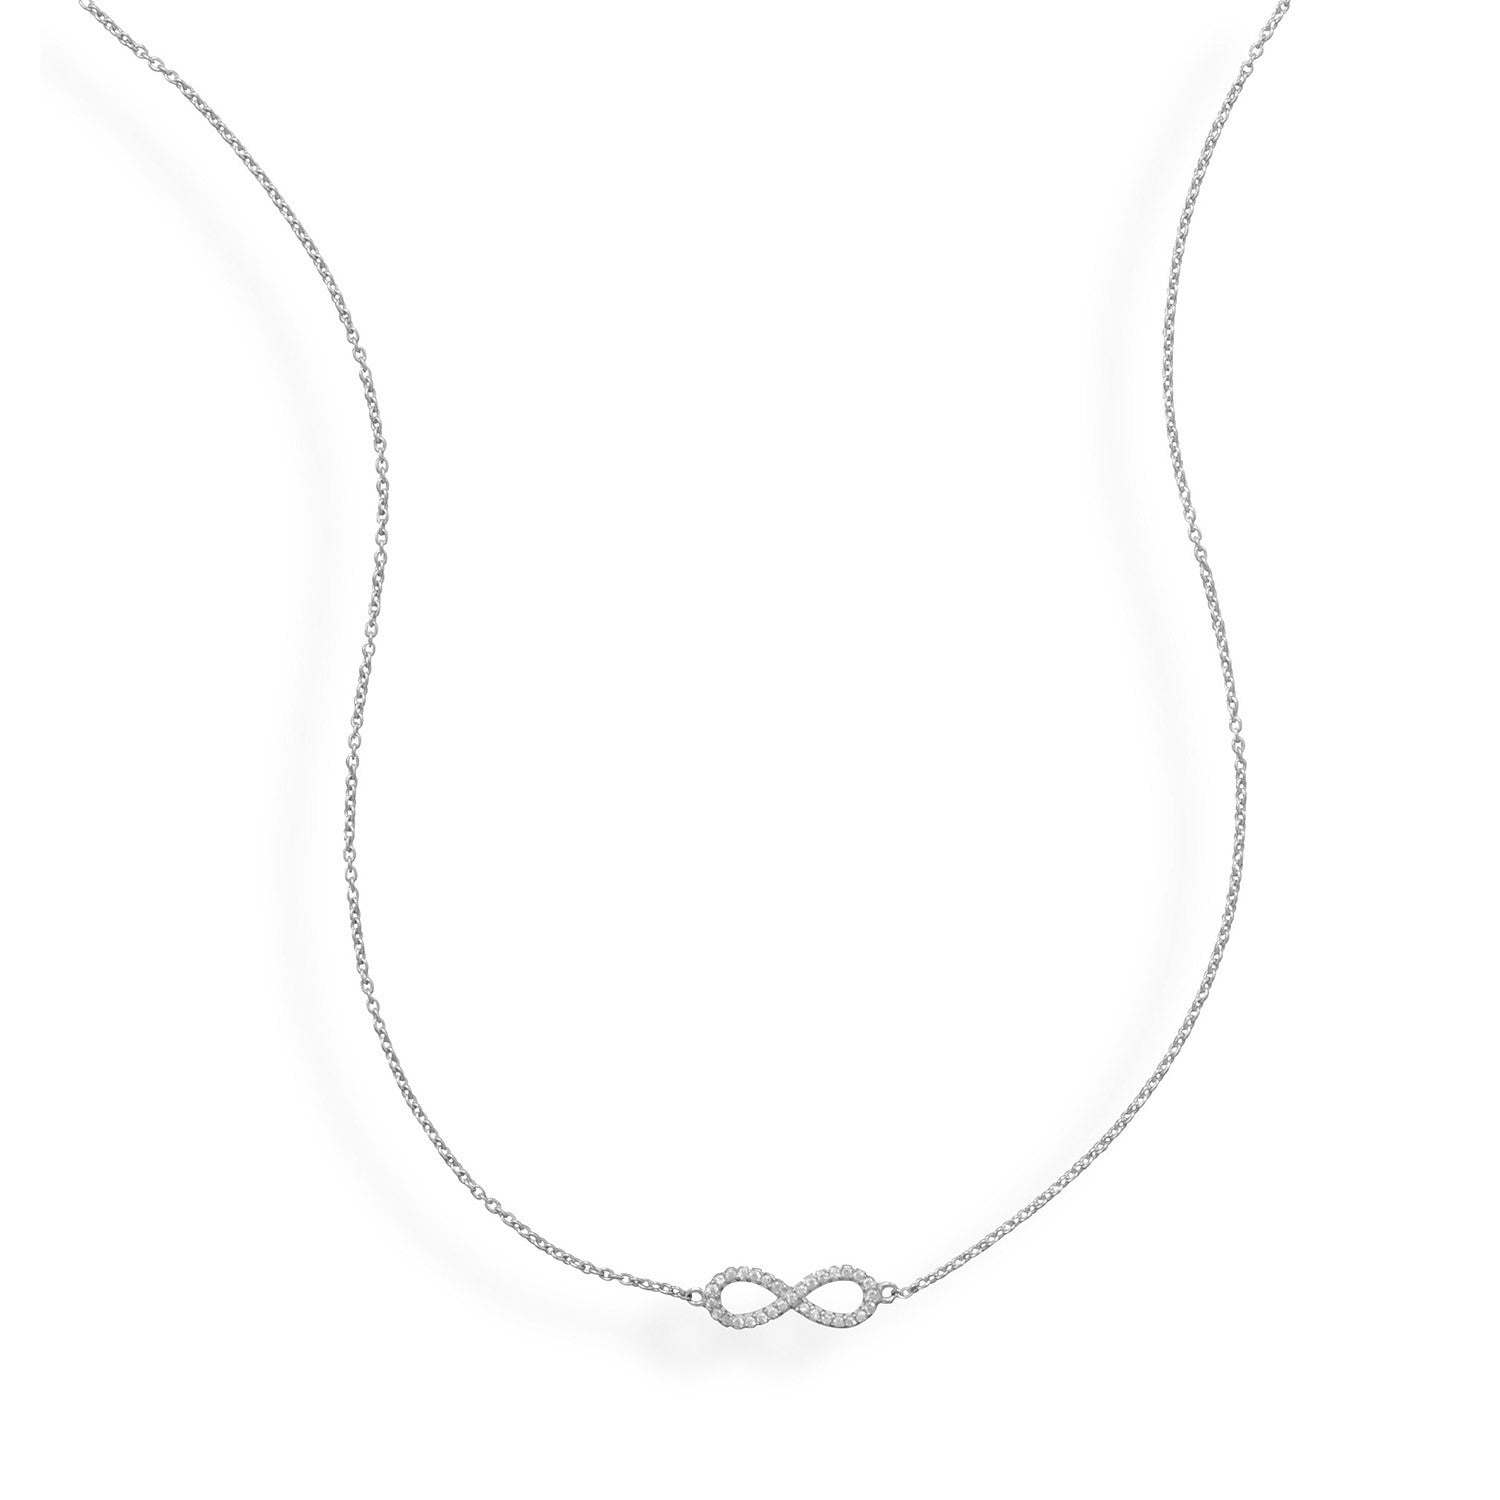 16" + 2" Rhodium Plated CZ Infinity Necklace